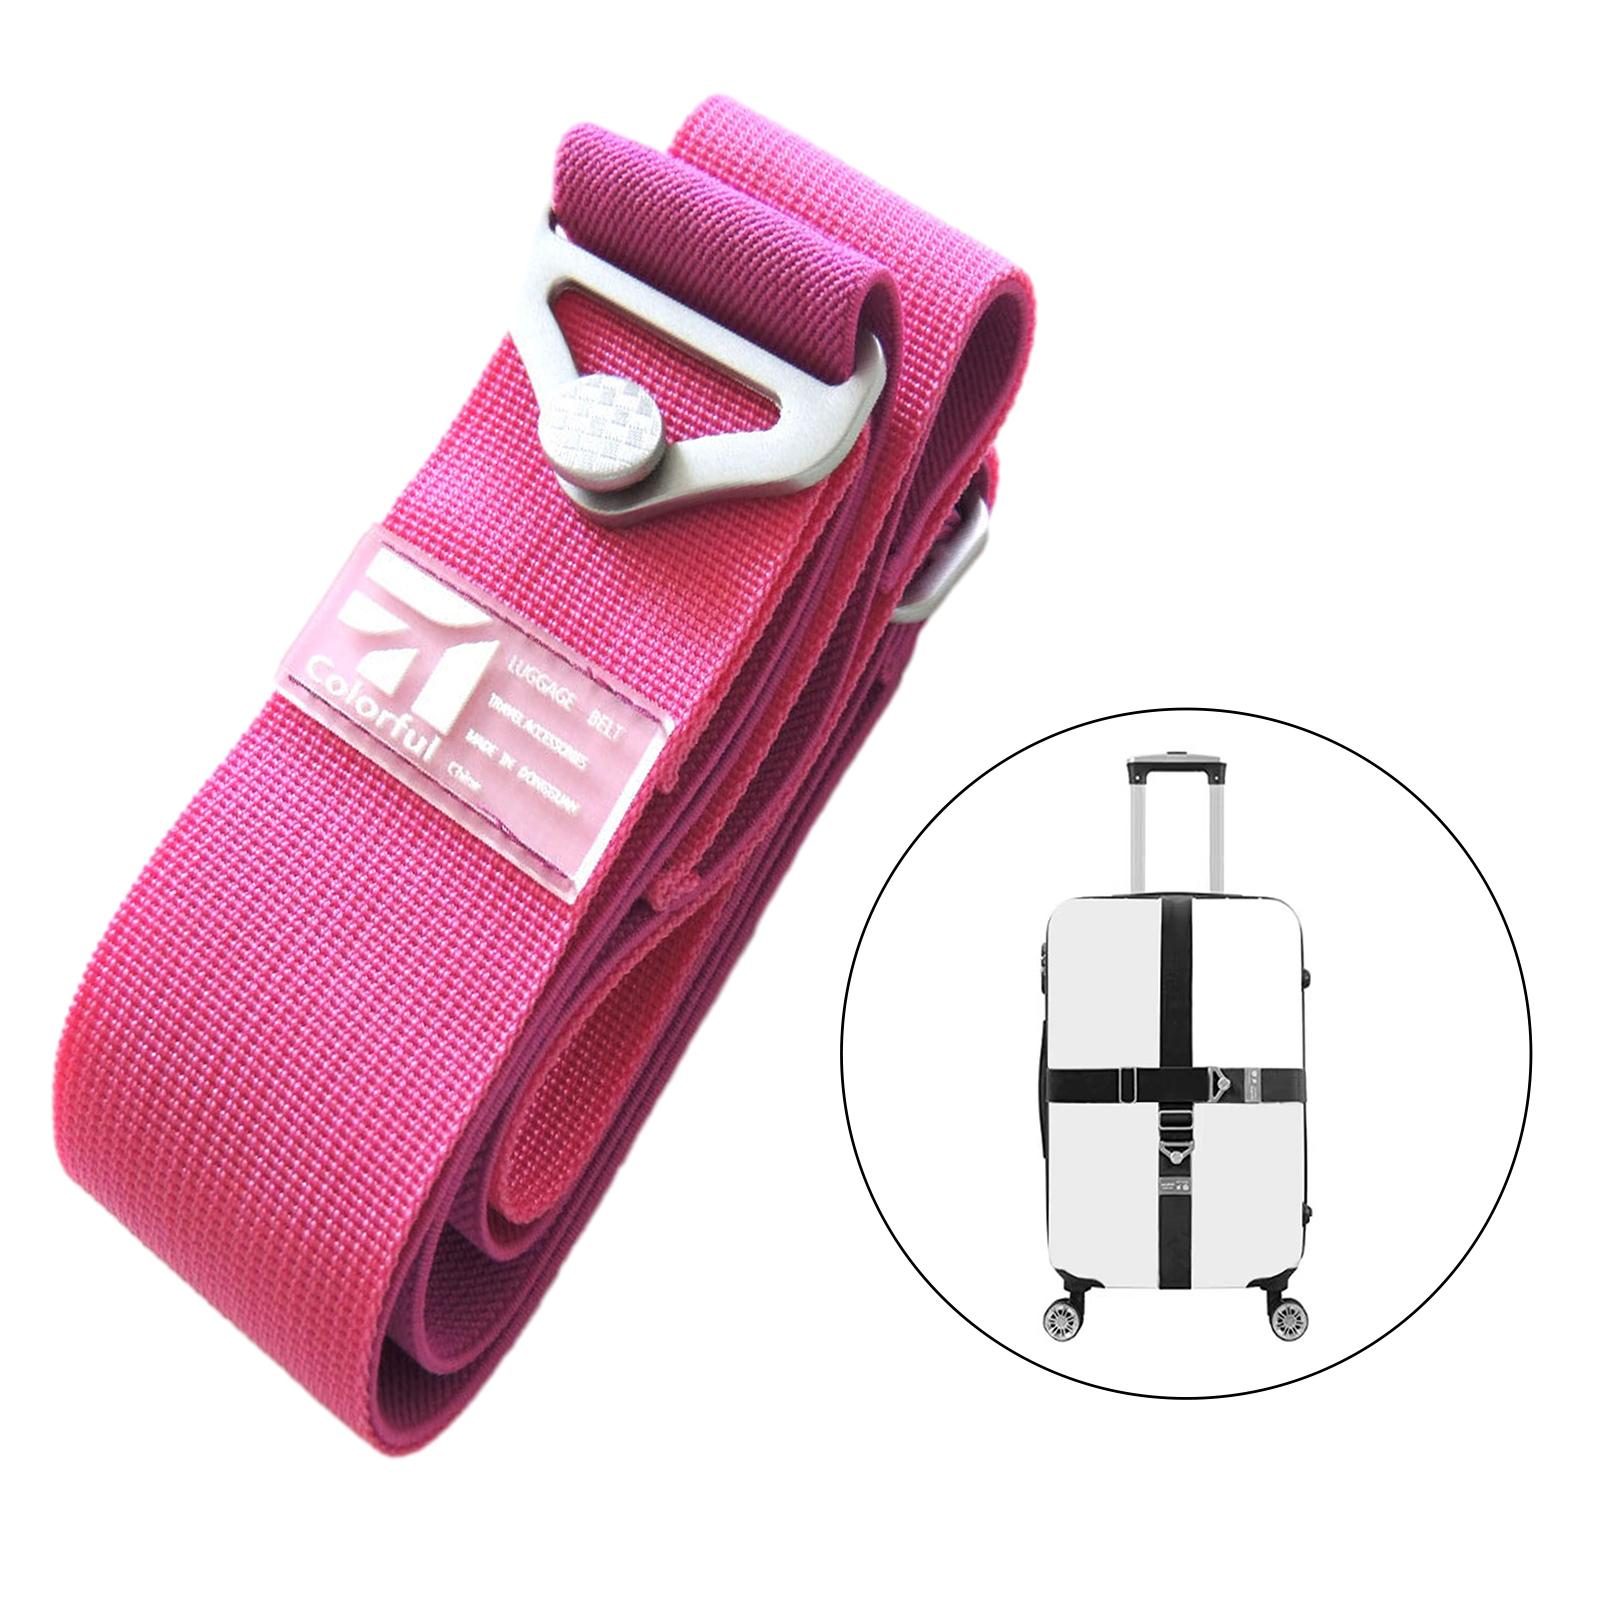 Luggage Strap Multipurpose Travel Packing Straps for Backpack Bags Rucksacks Rose Red